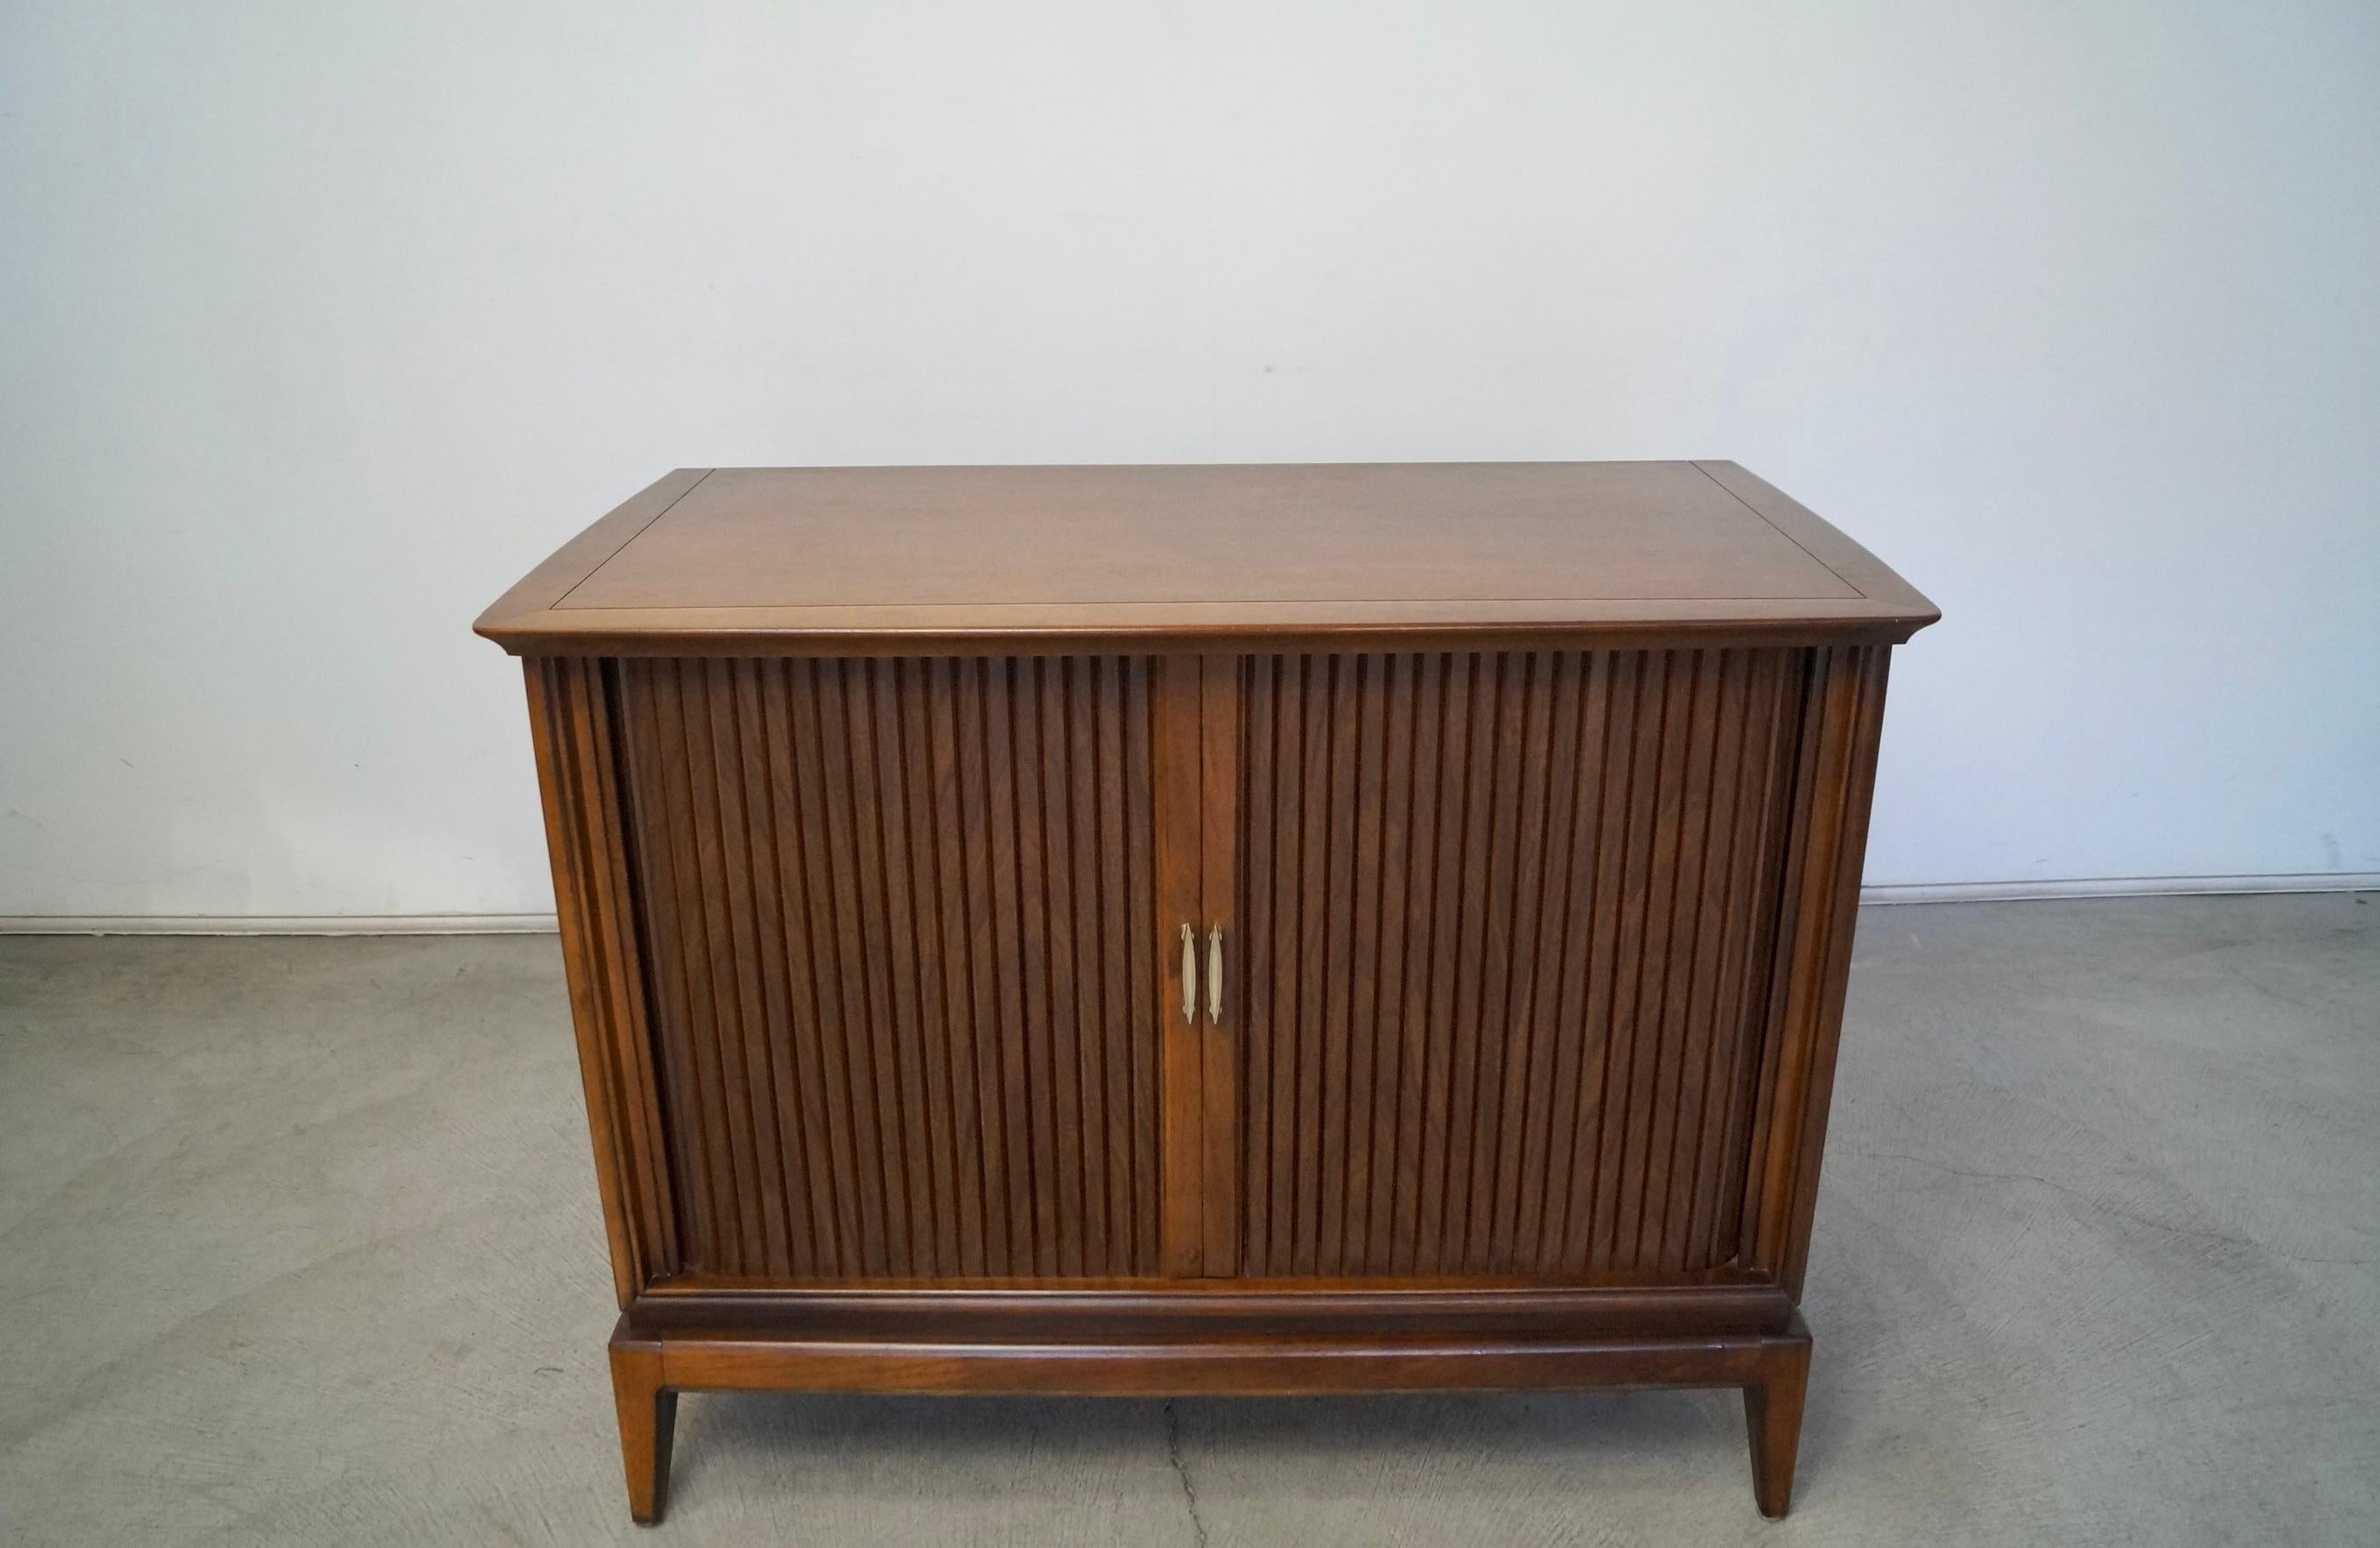 Vintage Mid-Century Modern TV console for sale. Manufactured by Magnavox in 1957, and is in incredible original condition. It's a tambour door credenza / cabinet that opens up to a TV. It turns on and there is still sound. Not sure if it can give